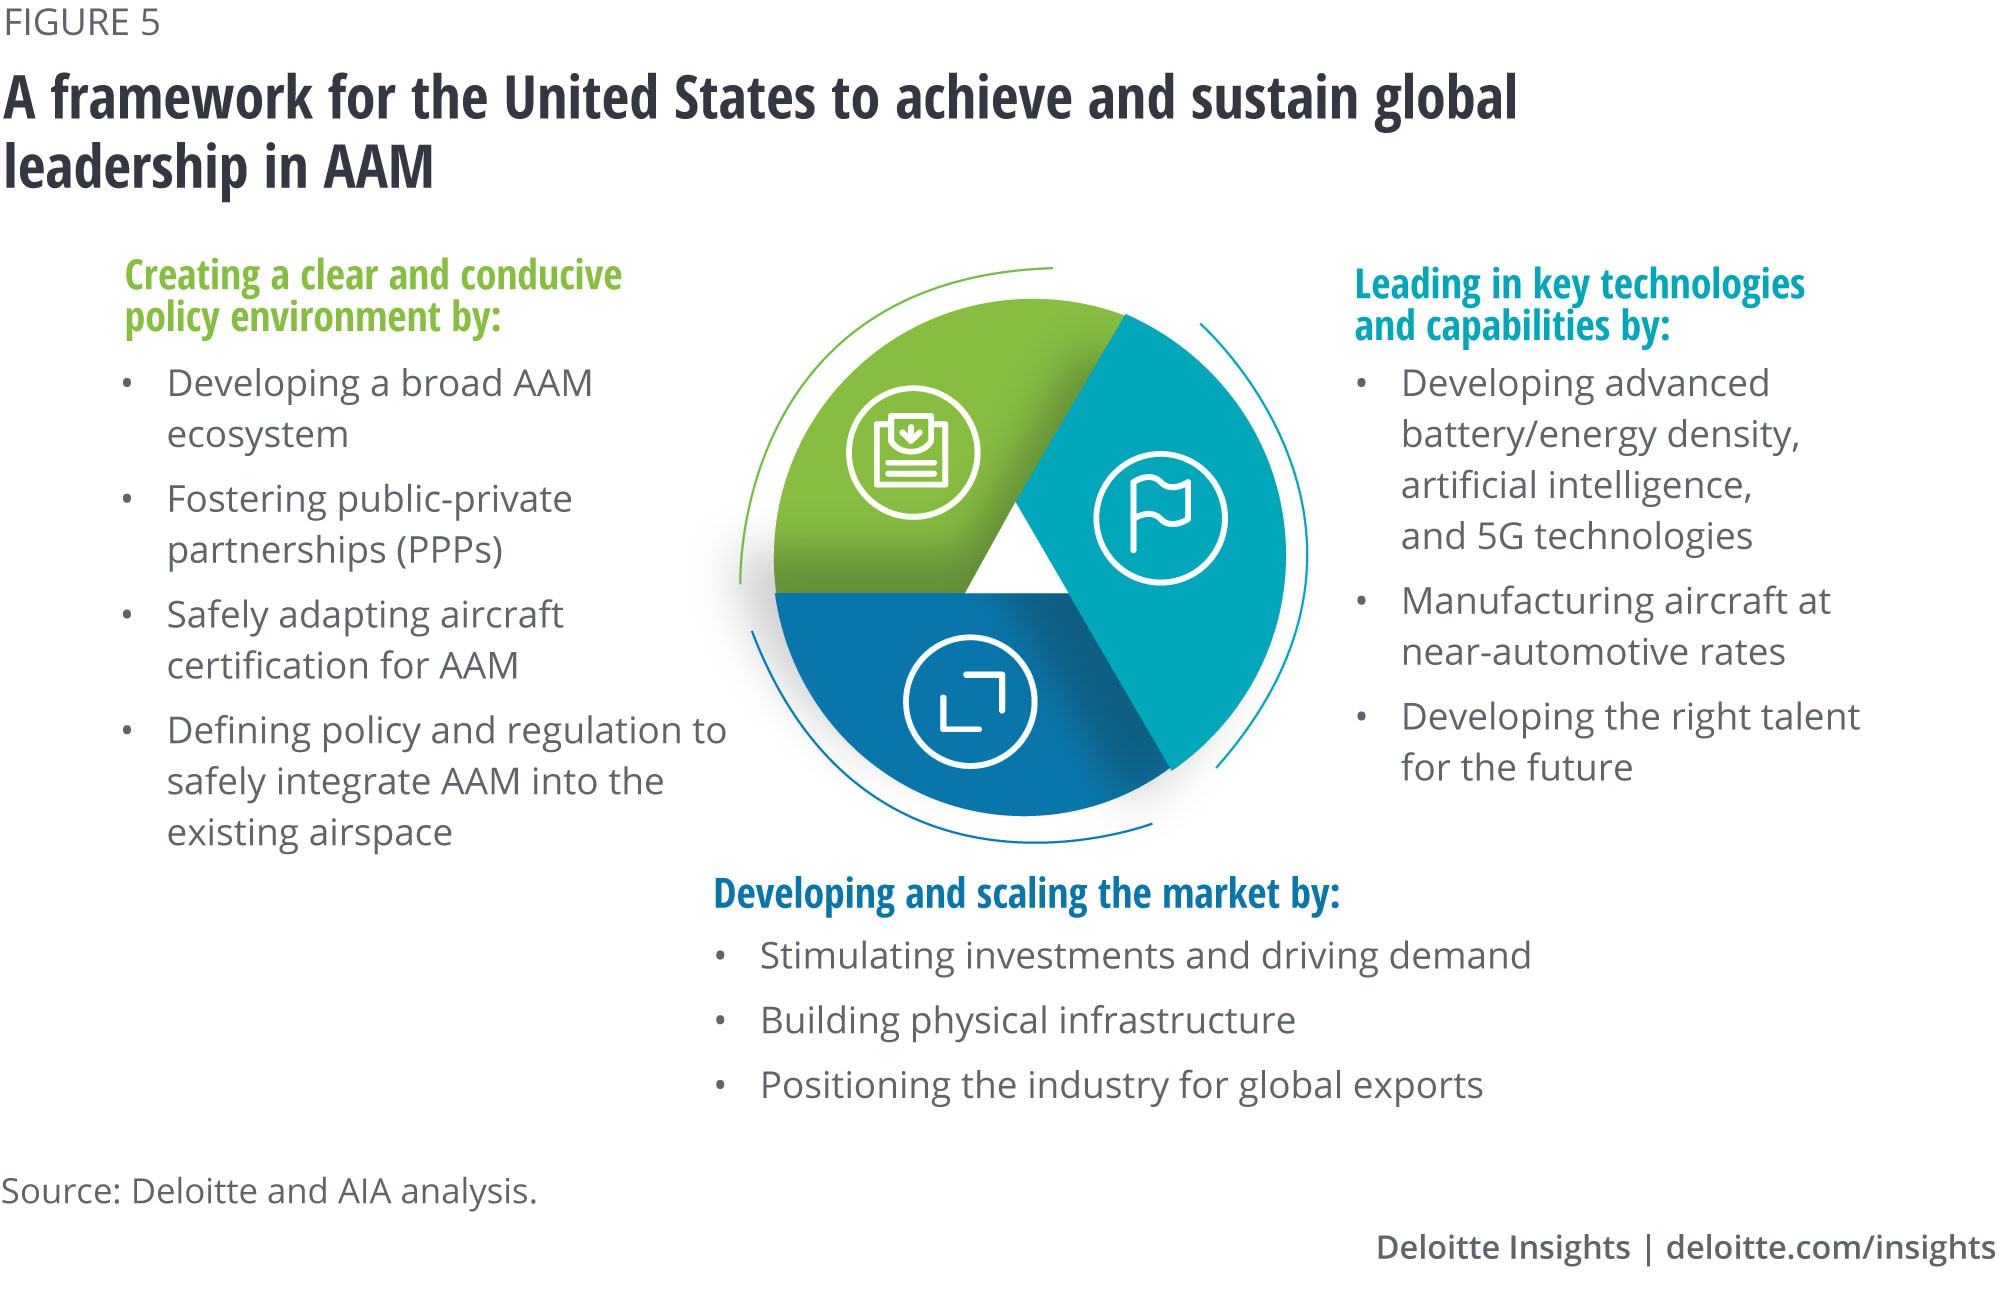 A framework for the United States to achieve and sustain global leadership in AAM